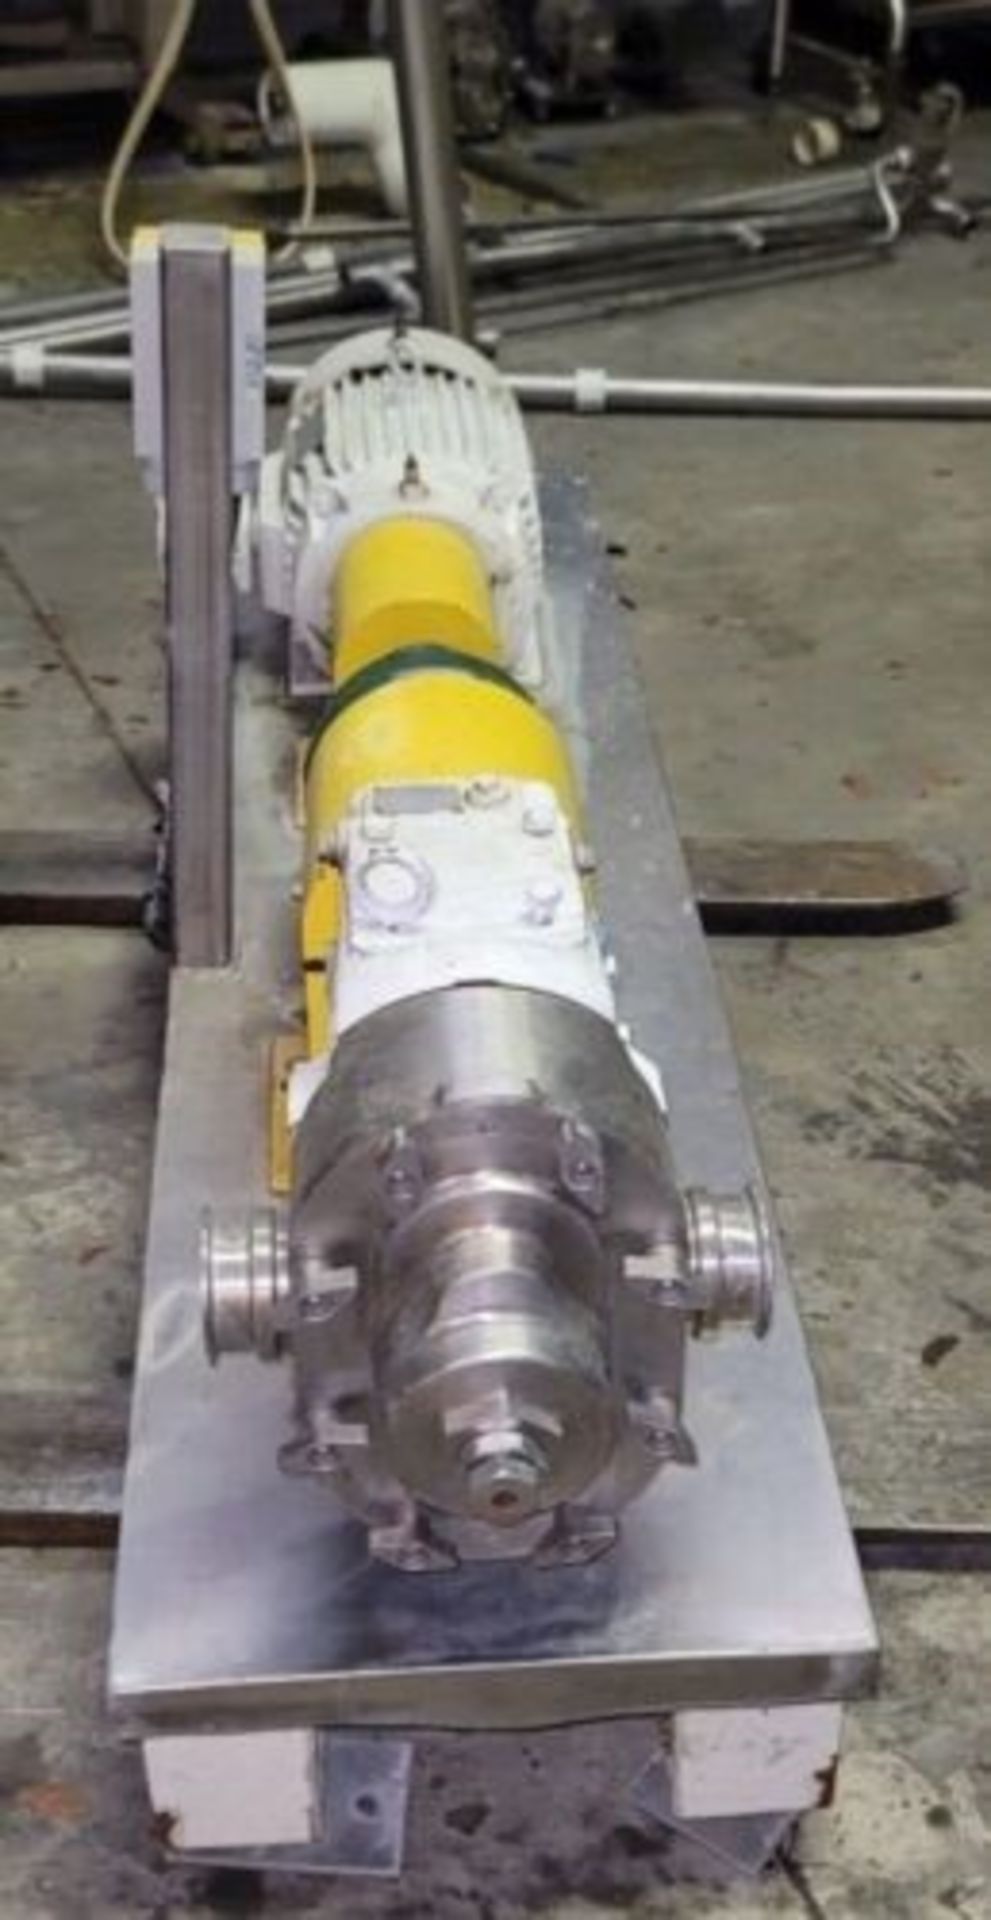 WAUKESHA 130 Positive Displacement Pump with 3in Outlet, 10HP Motor. 230/460V 1755 RPM, Last used in